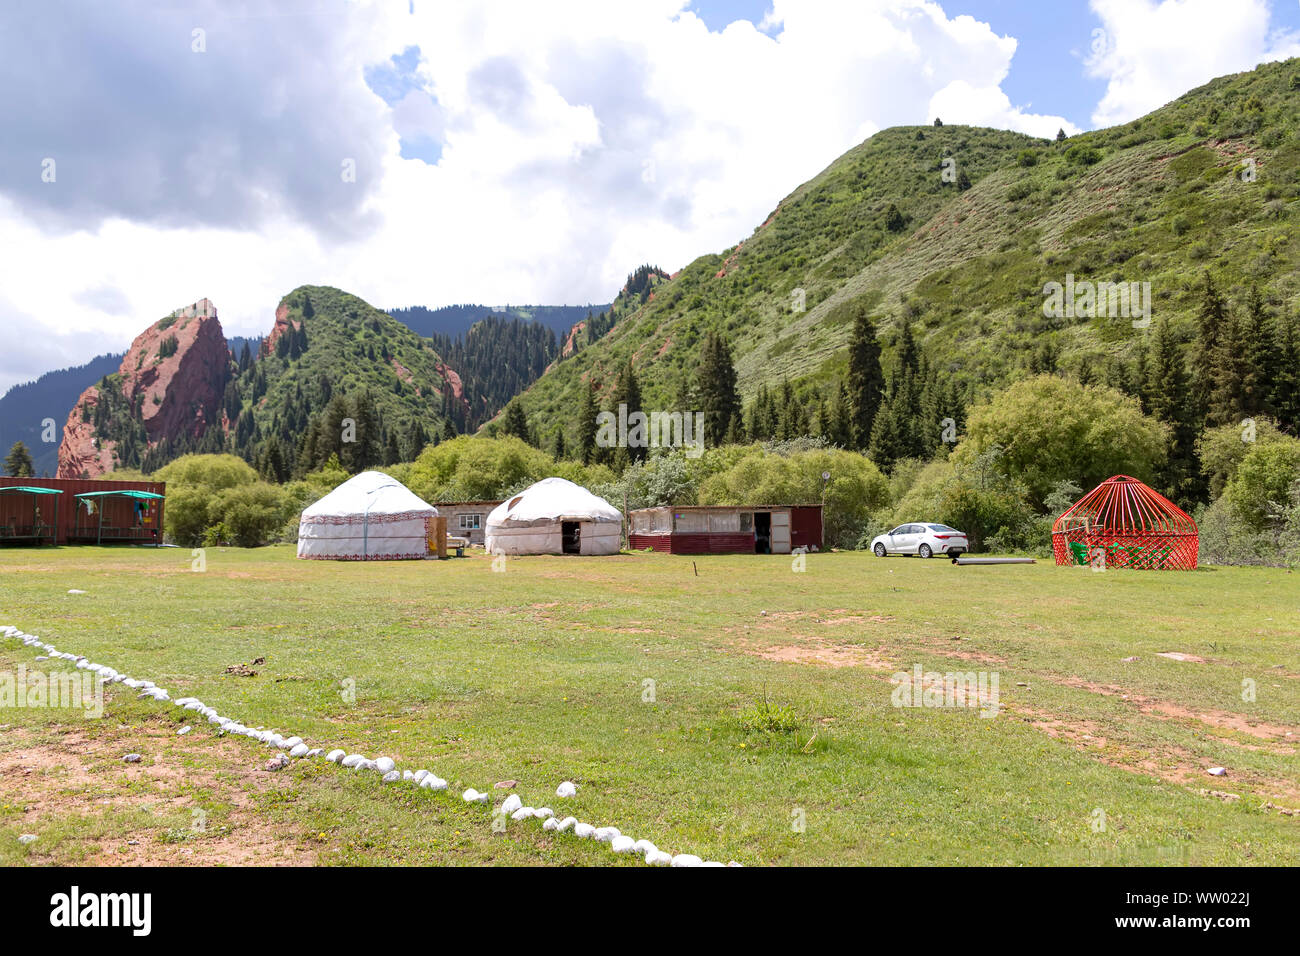 Rock Broken Heart in the Jeti-Oguz gorge Kyrgyzstan with white yurts in the foreground Stock Photo